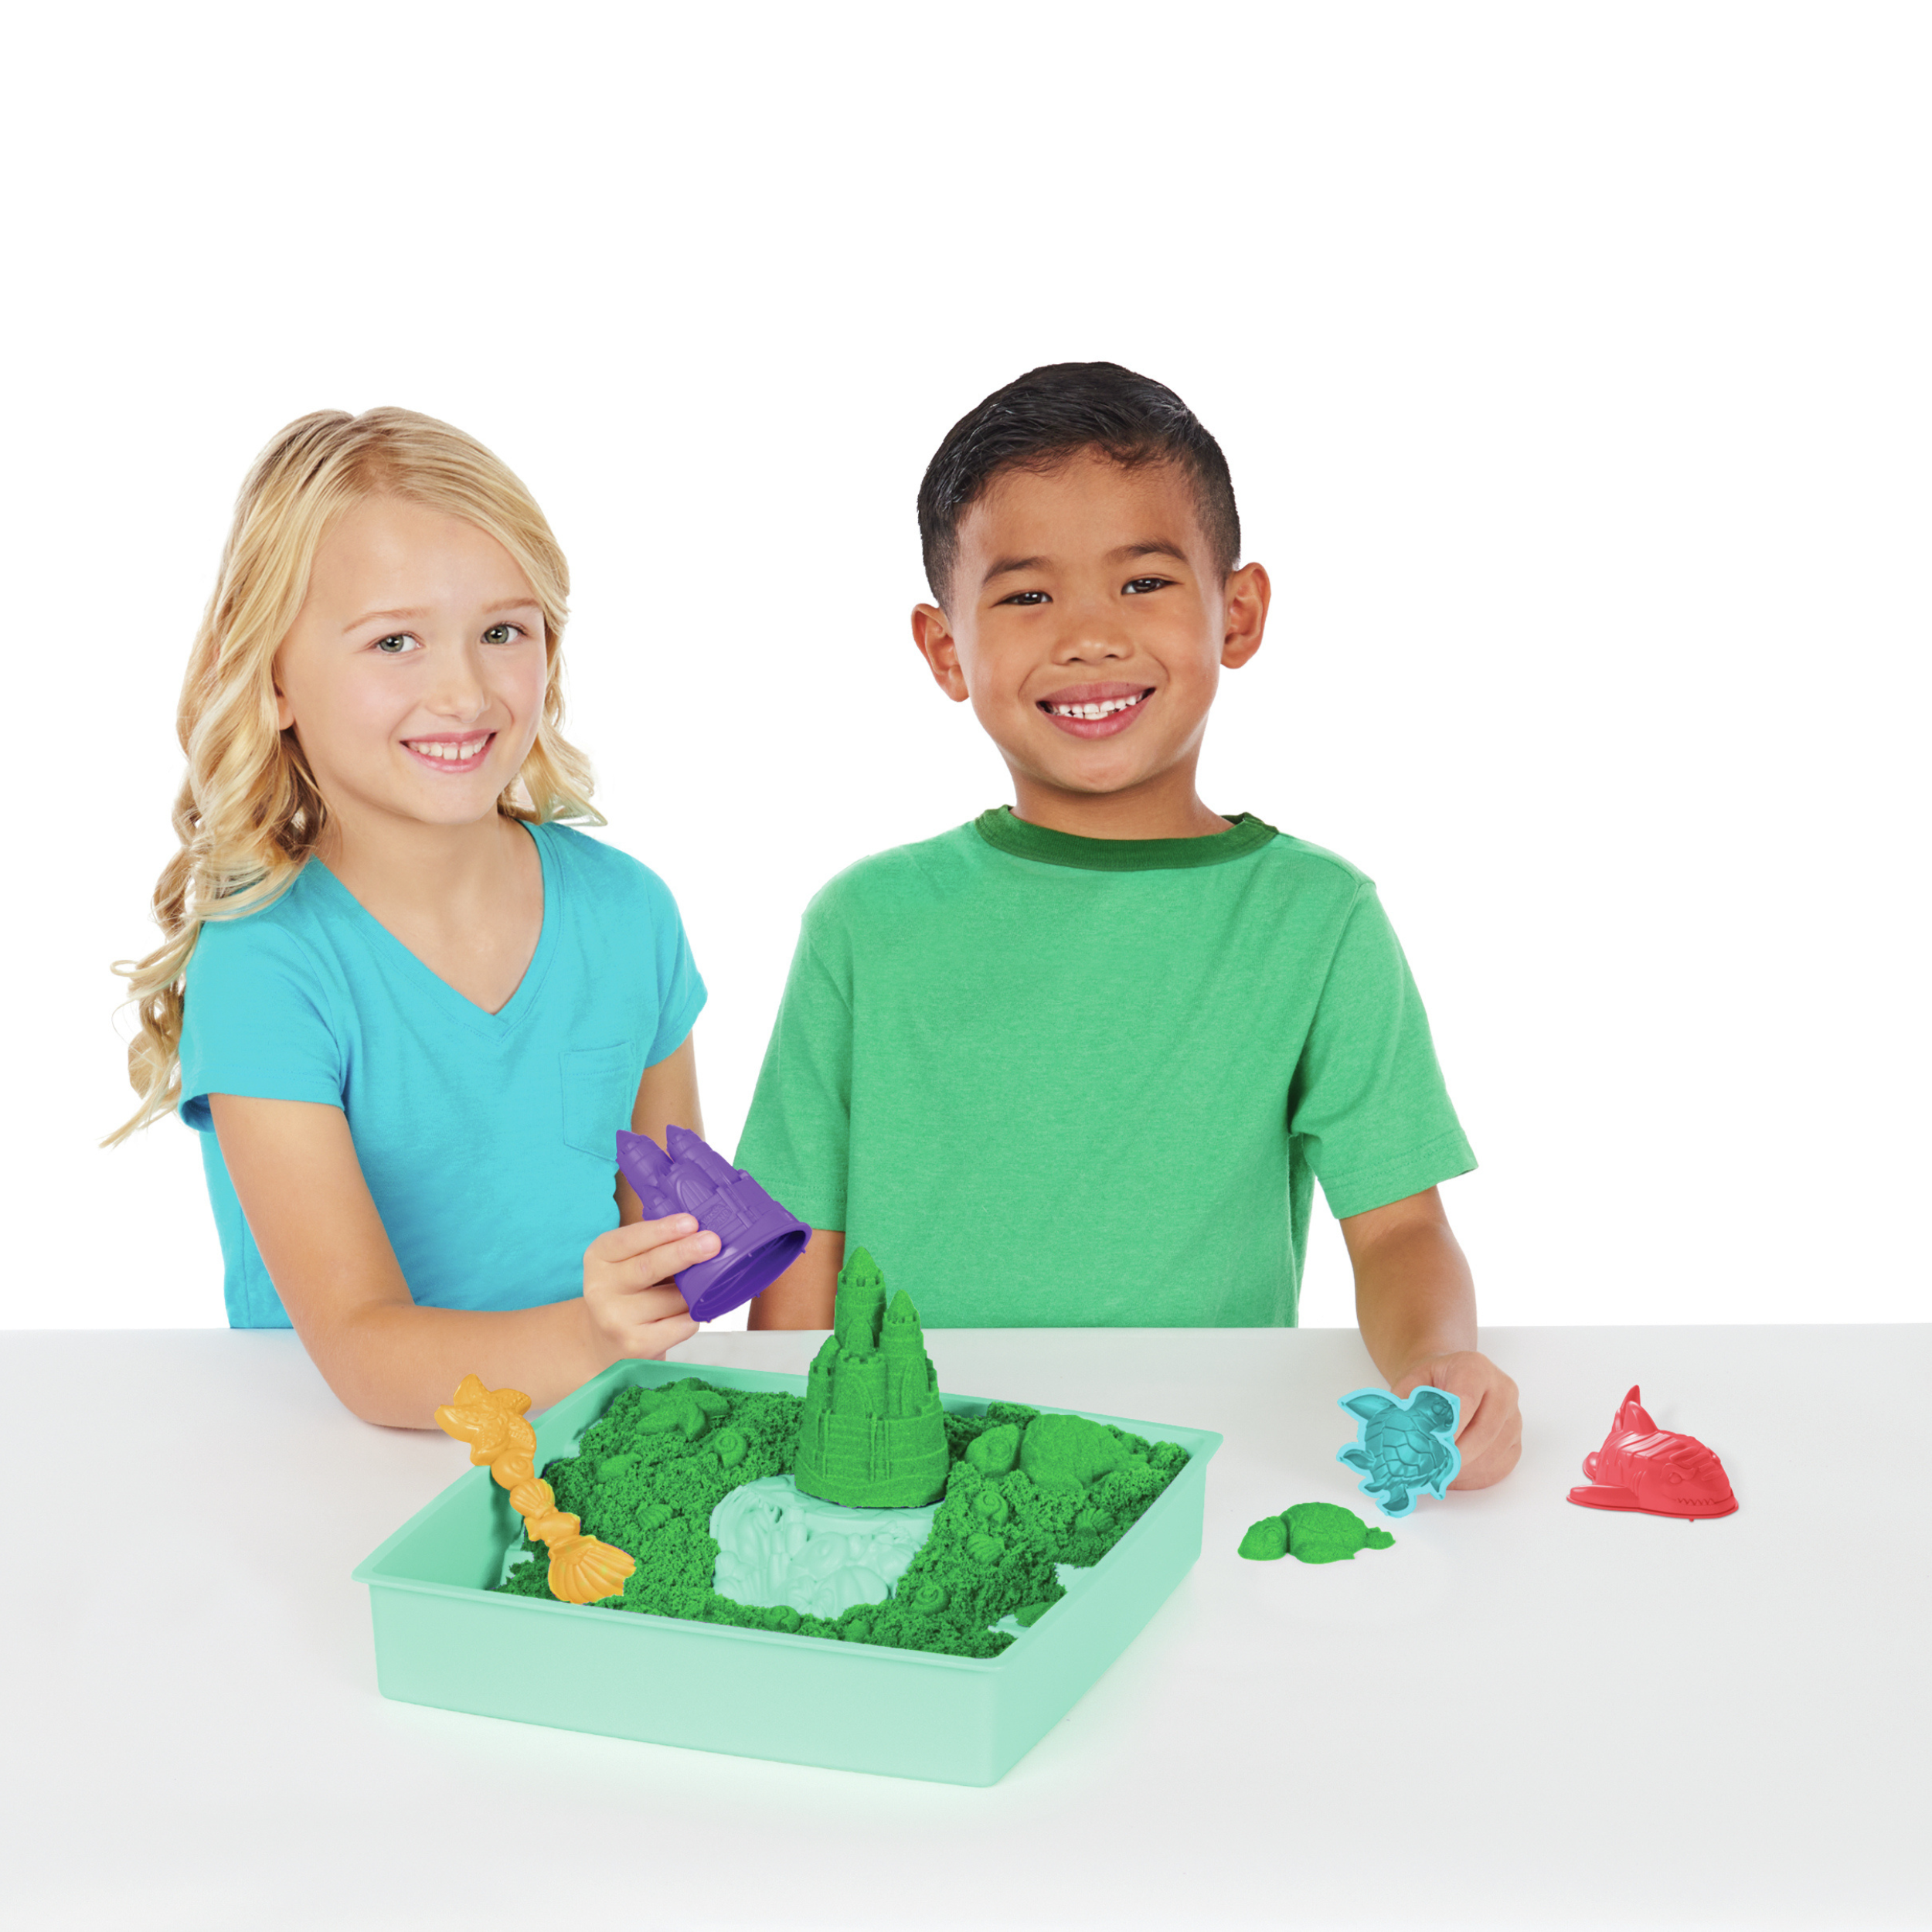 Kinetic Sand, Sandbox Playset with 1lb of Blue Kinetic Sand and 3 Molds,  for Ages 3 and up 